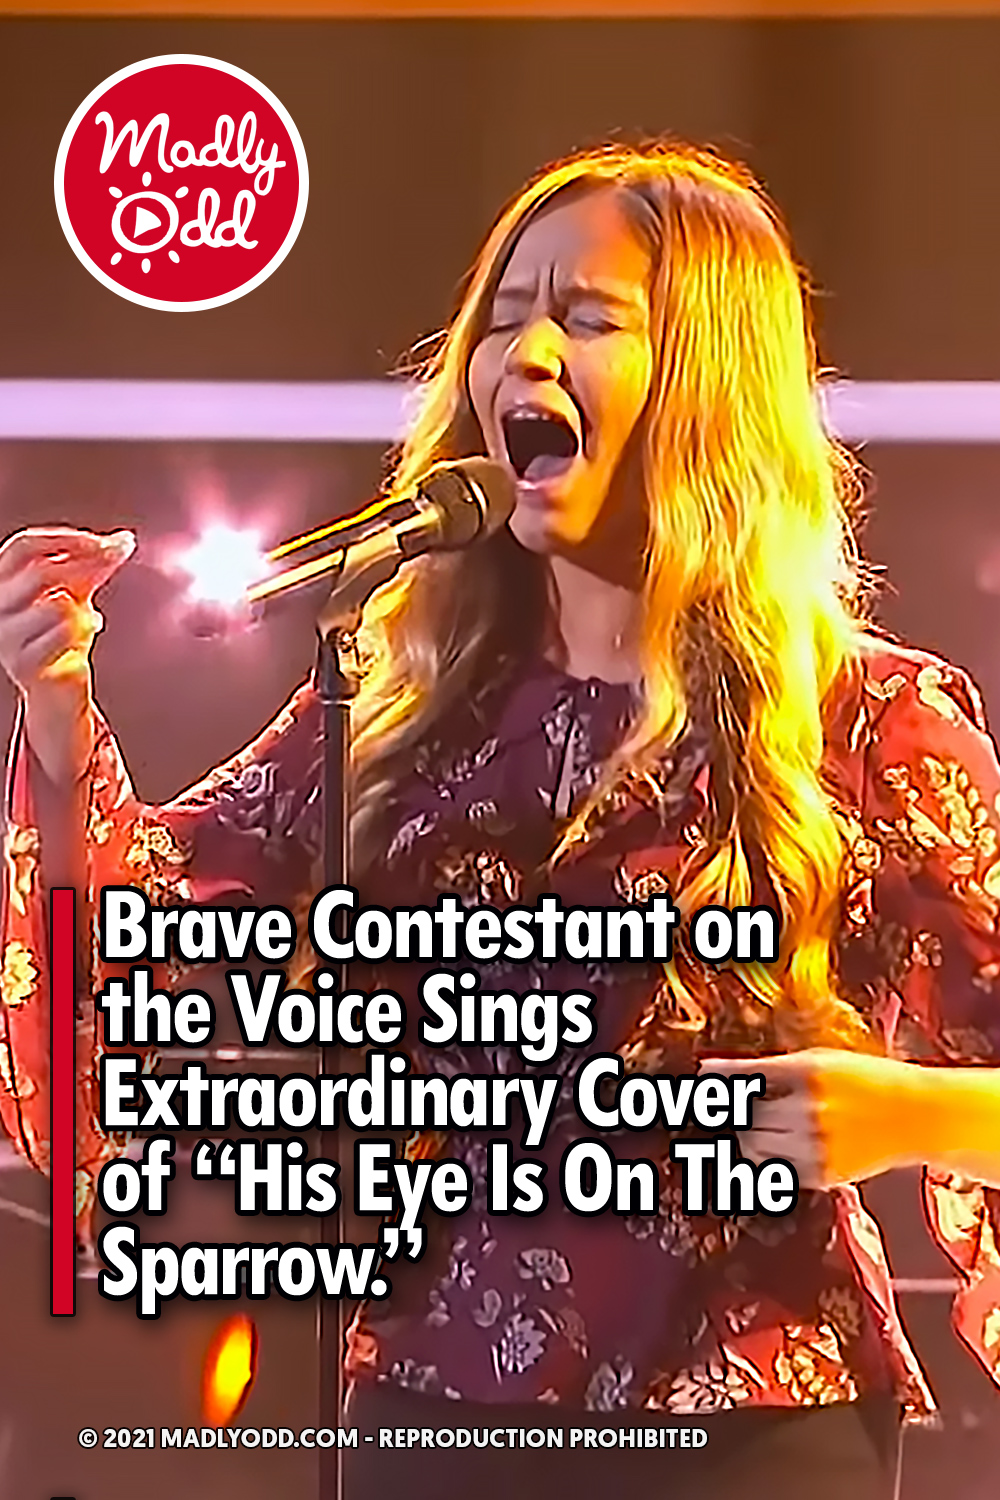 Brave Contestant on the Voice Sings Extraordinary Cover of “His Eye Is On The Sparrow.”